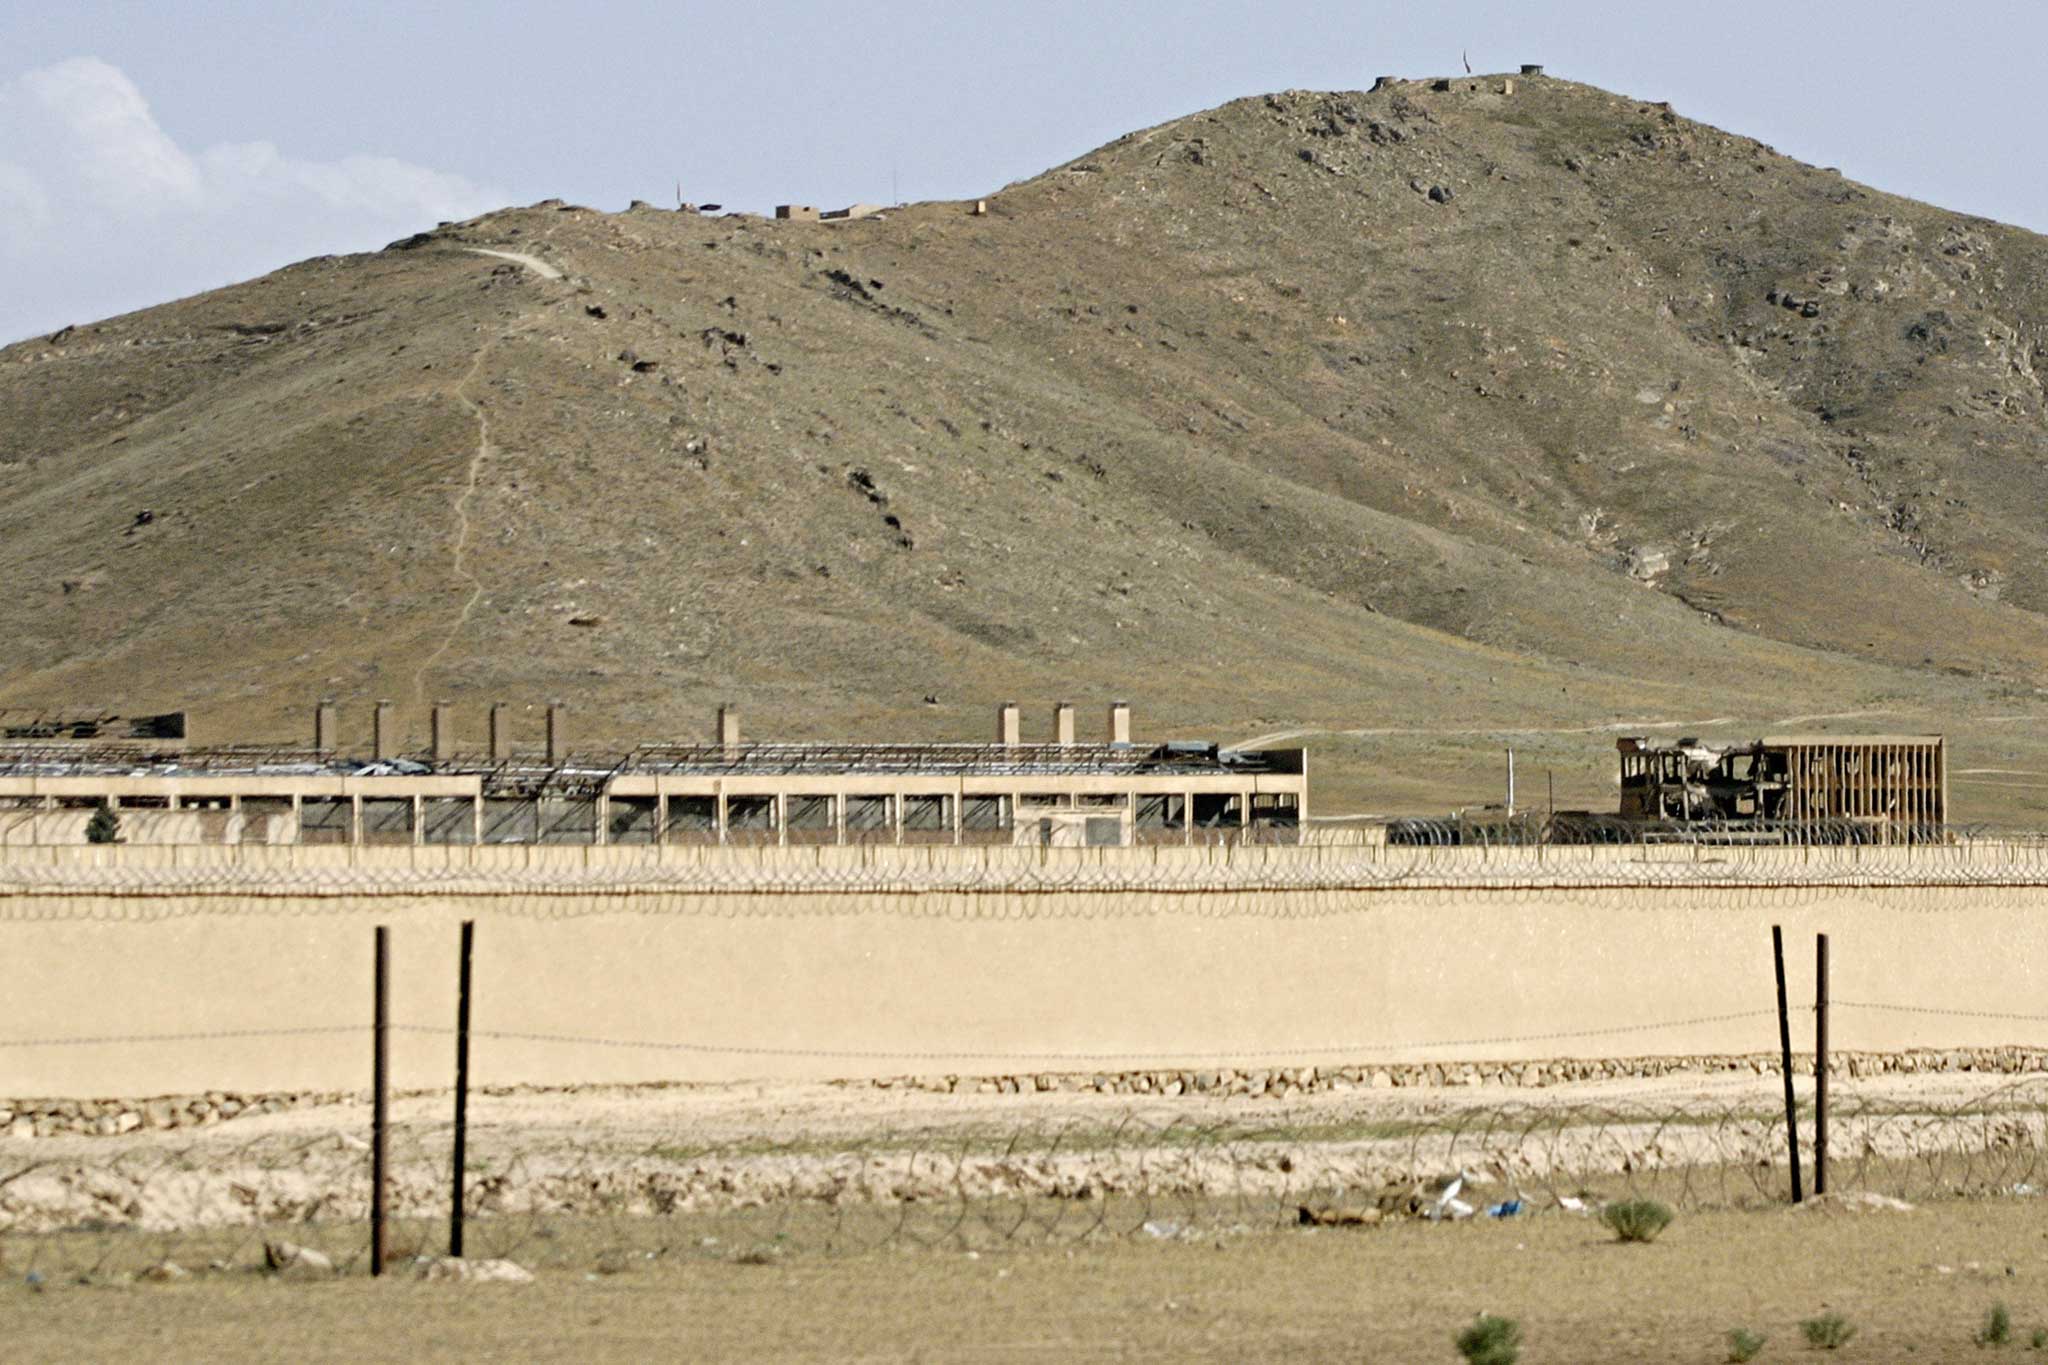 The Salt Pit, previously secret CIA prison, north-east of Kabul, Afghanistan